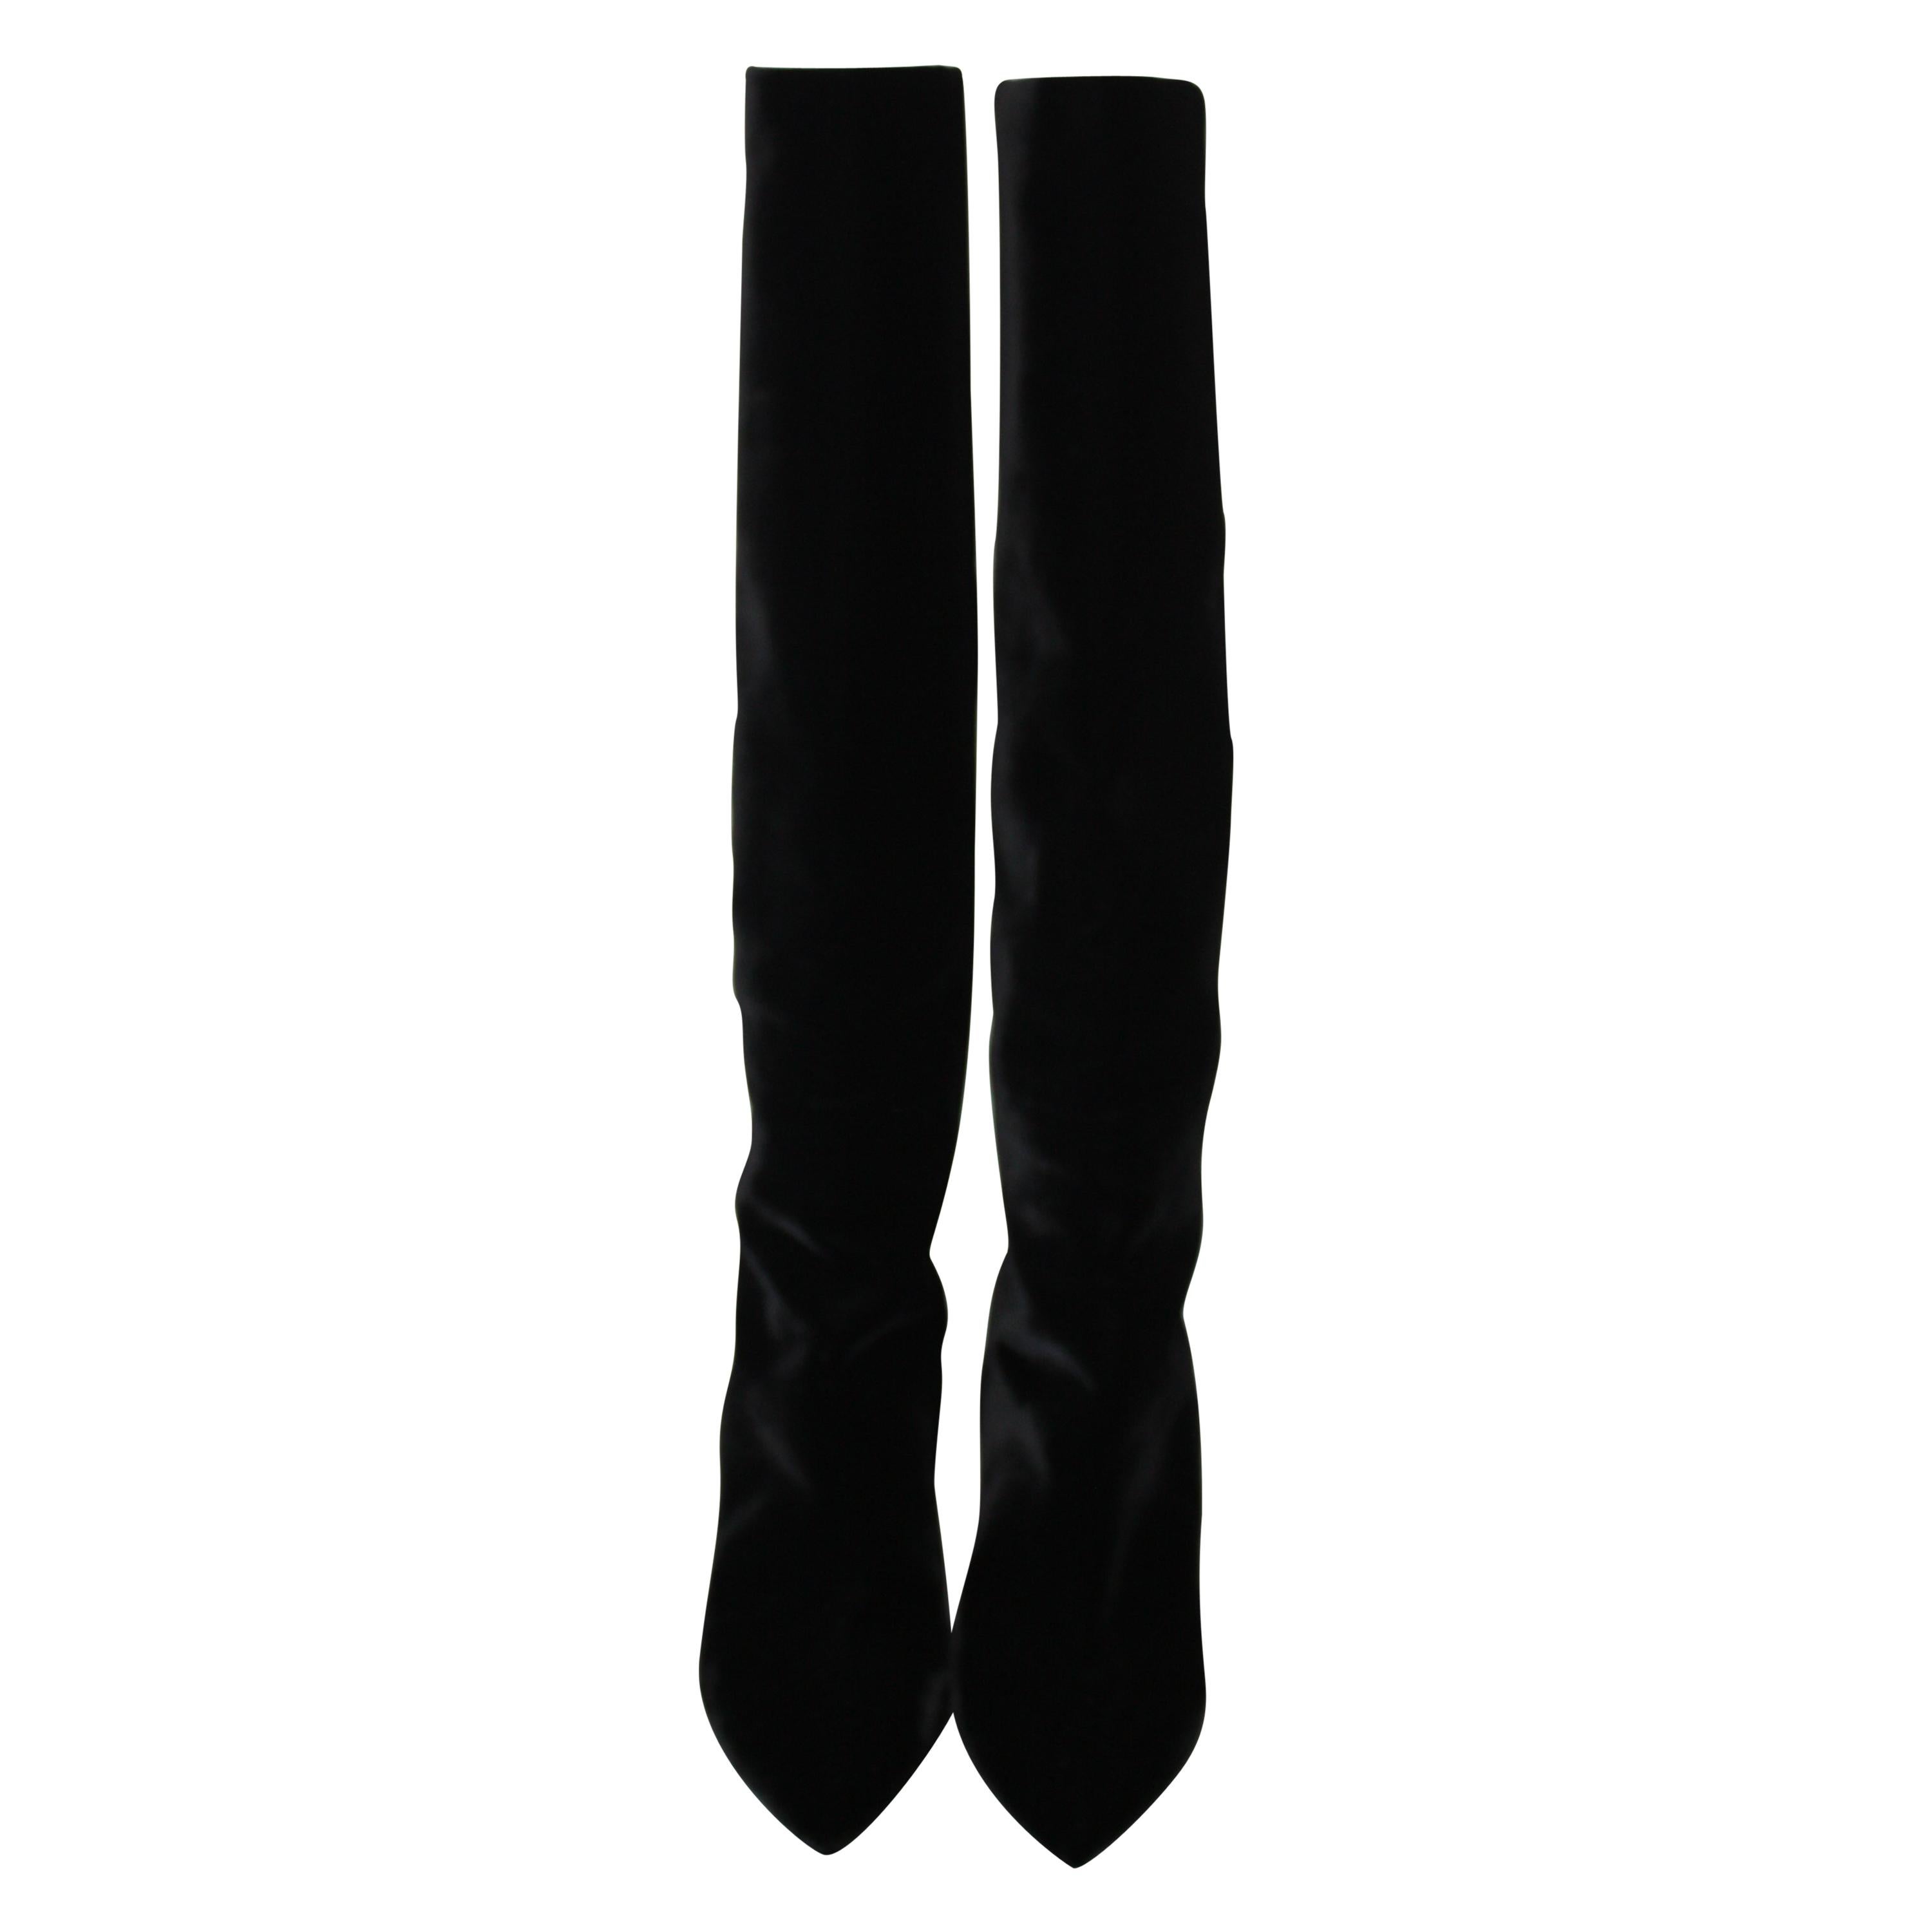 Saint Laurent Niki black velvet slouch boots. Come to just about your knee (depending on your height.) 
Pointy toe and slight wedge. These boots are epic! Current season. 
Little to no signs of wear.
Size 39